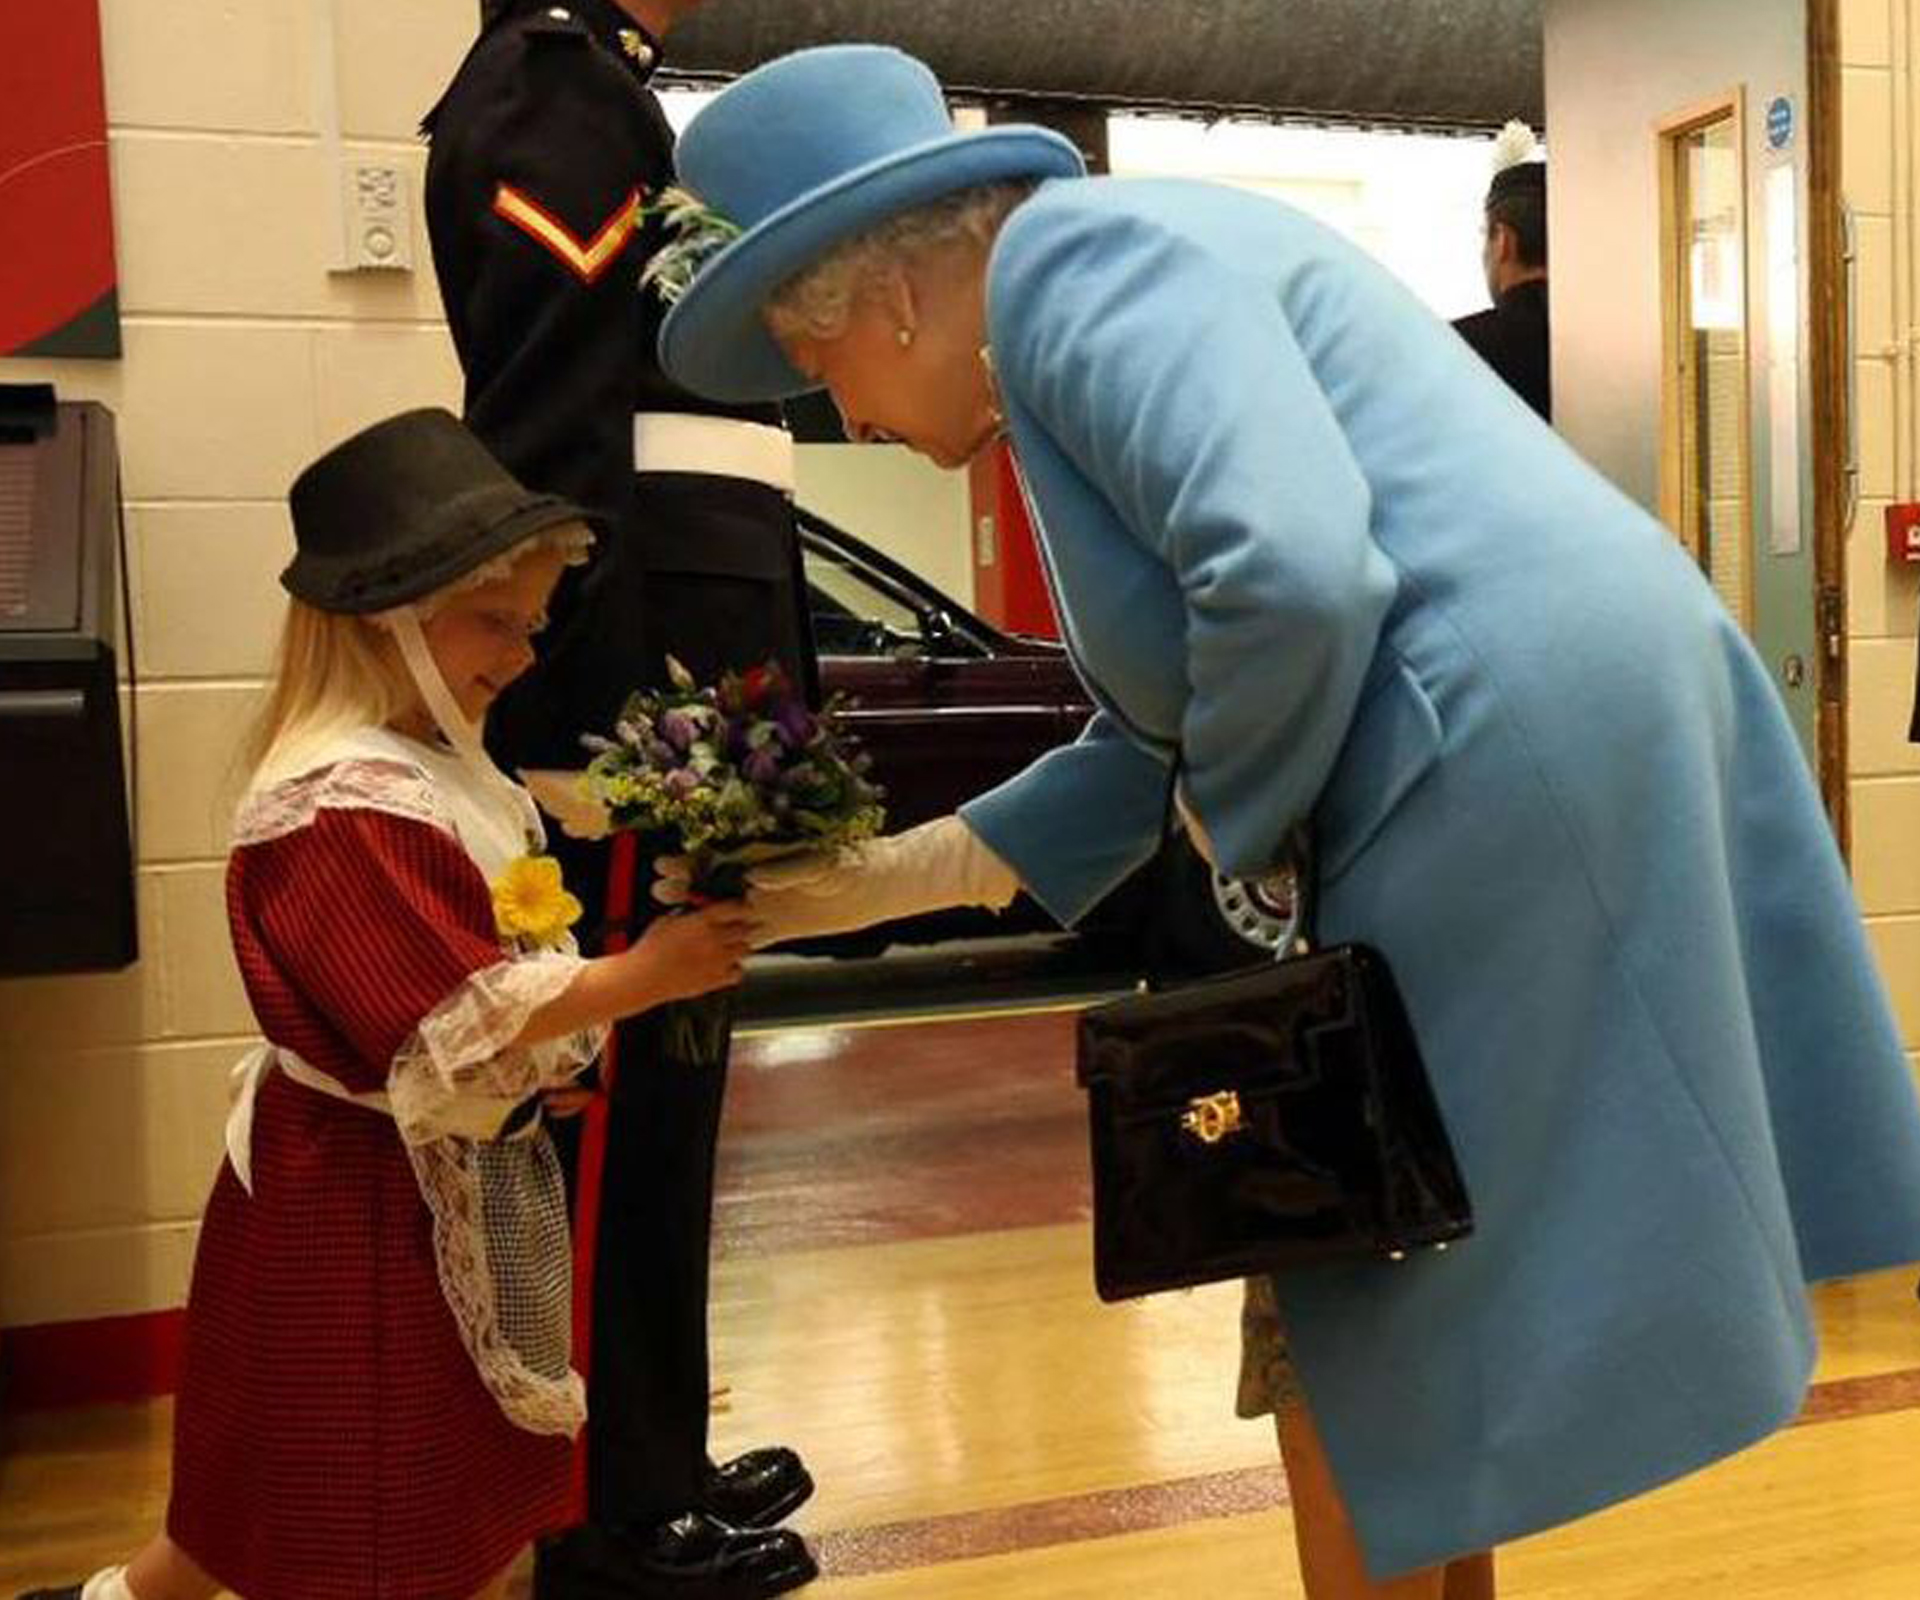 Oopsie Maisie: Child hit in face by saluting soldier after meeting the Queen